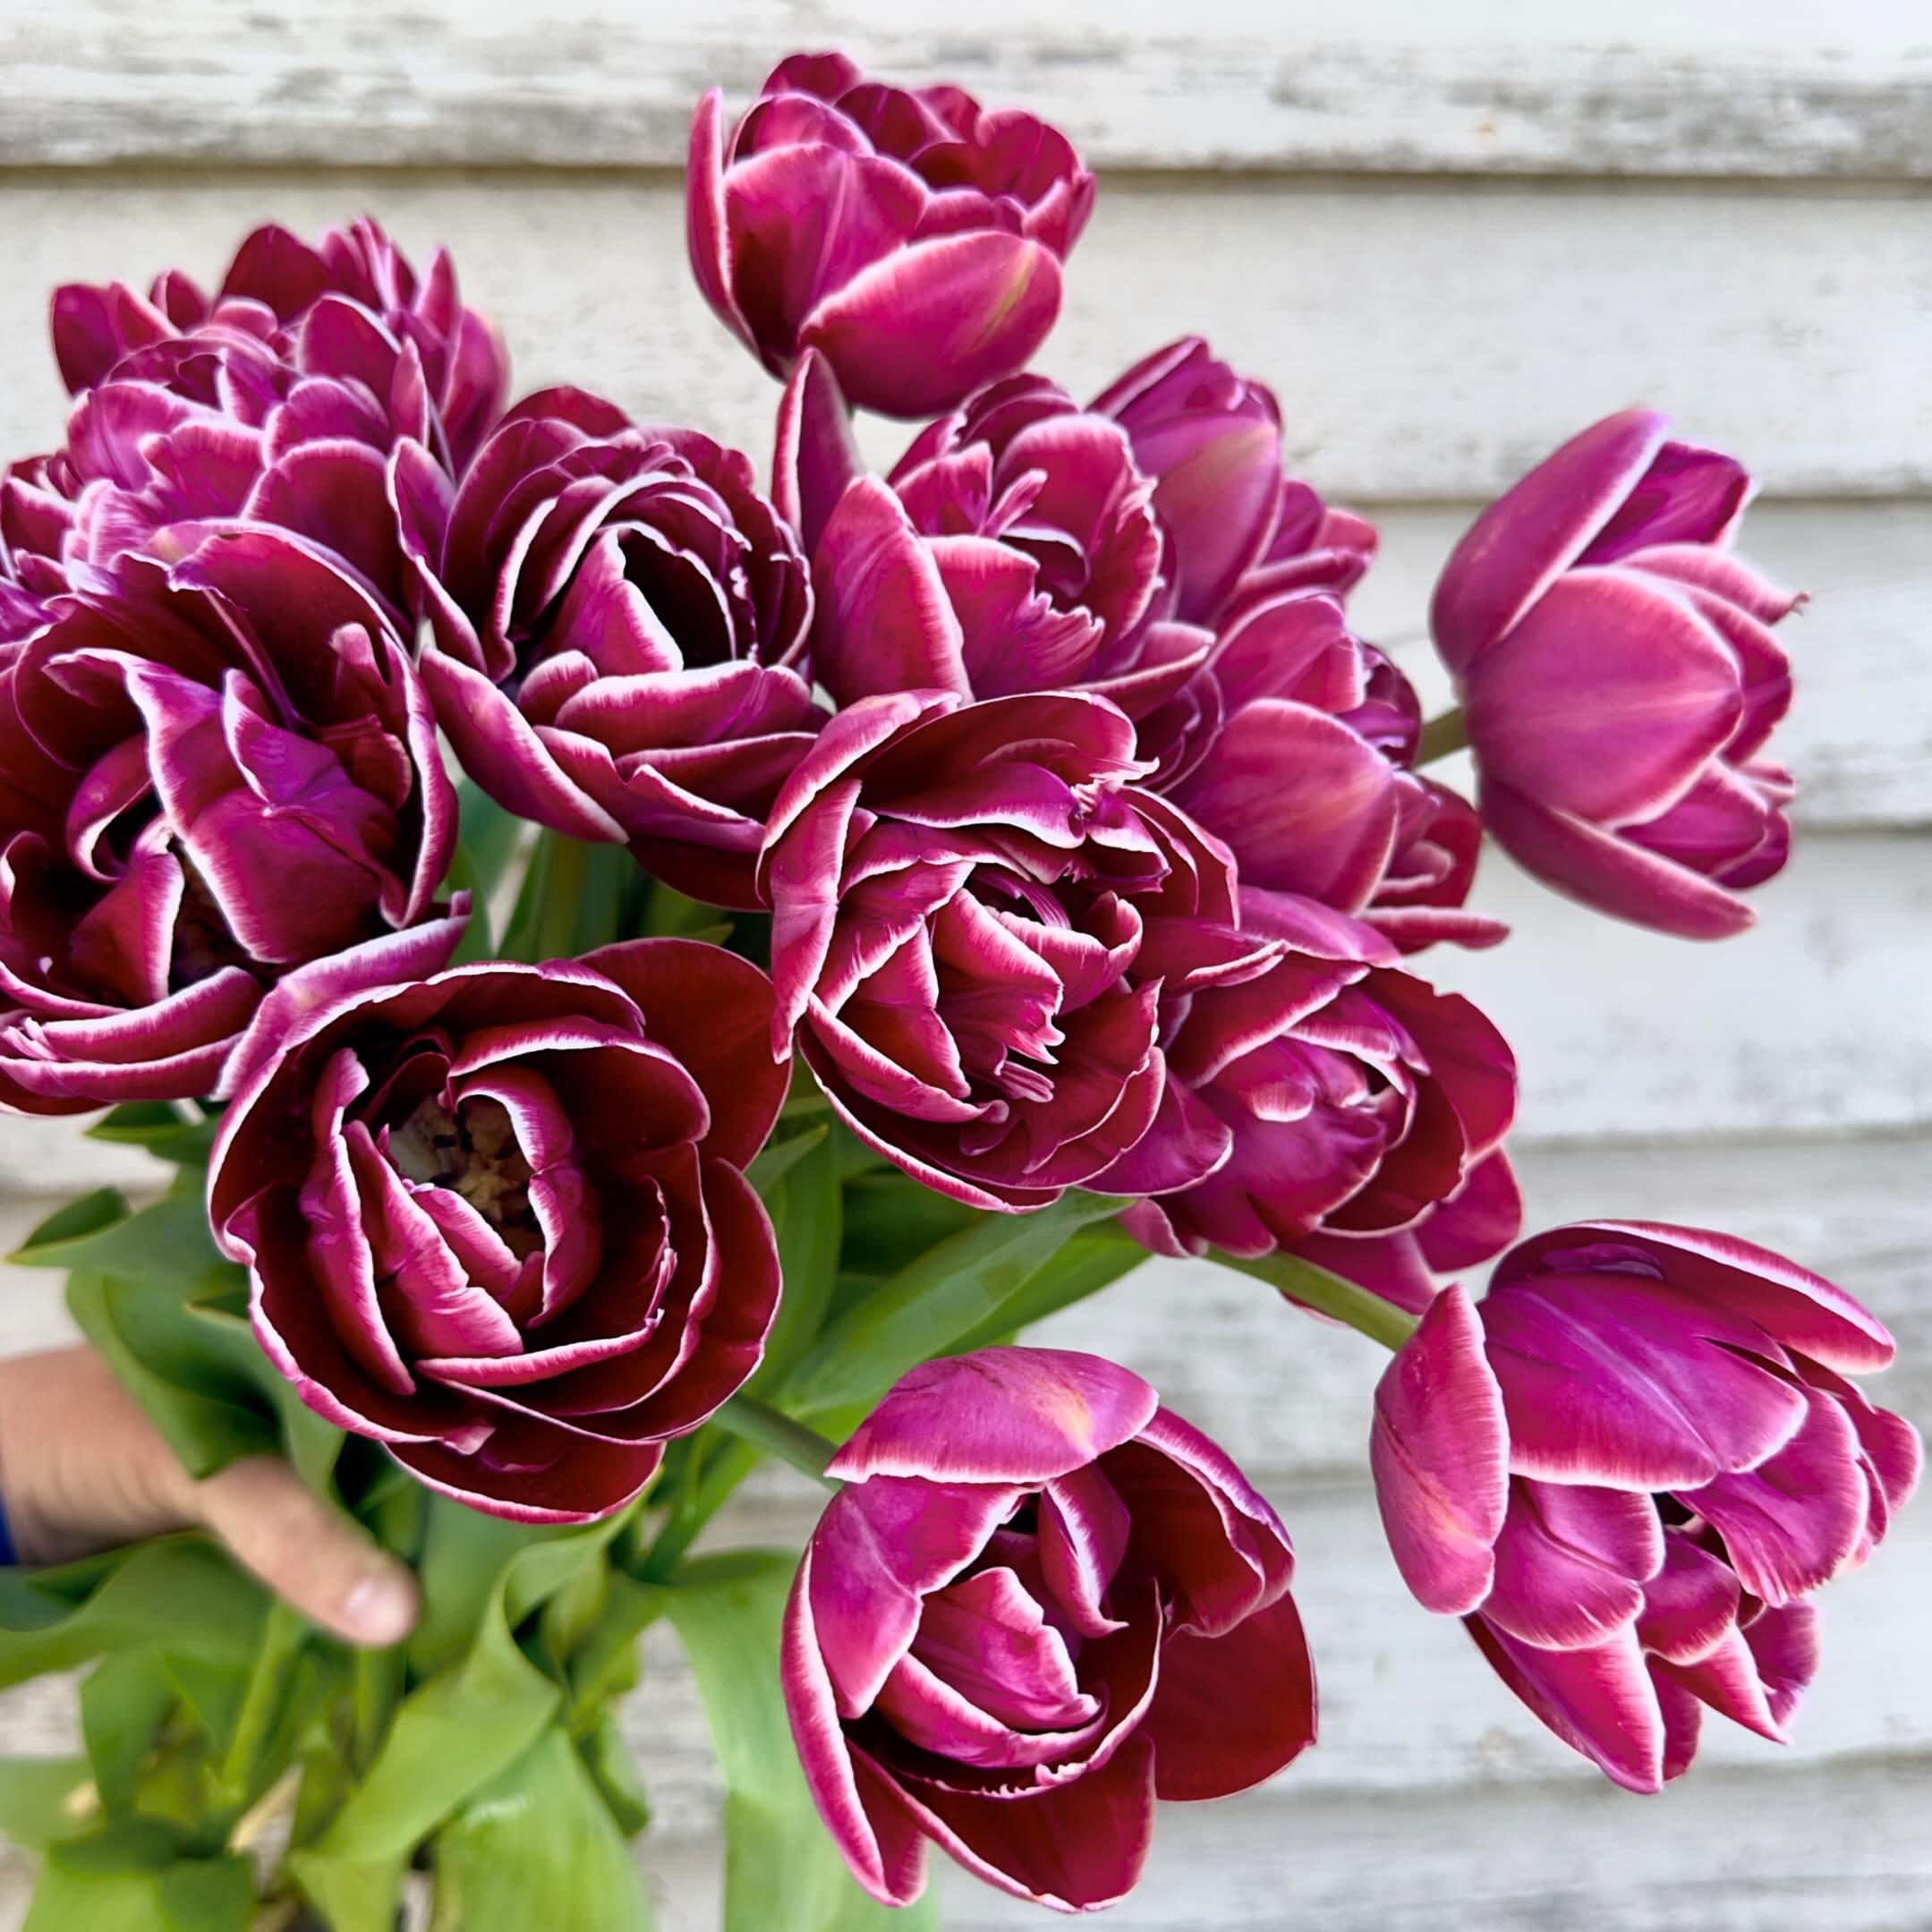 Tulip: Dream Touch

Hoping to squeak a few more days out of the tulips. I love the white etching on this plum-y double tulip! 💜

#beemerryfarm #flowers #tulips #tulipseason #purple #plum #royal #peony #doubletulip #ayearinflowers #seasonalflowers #s